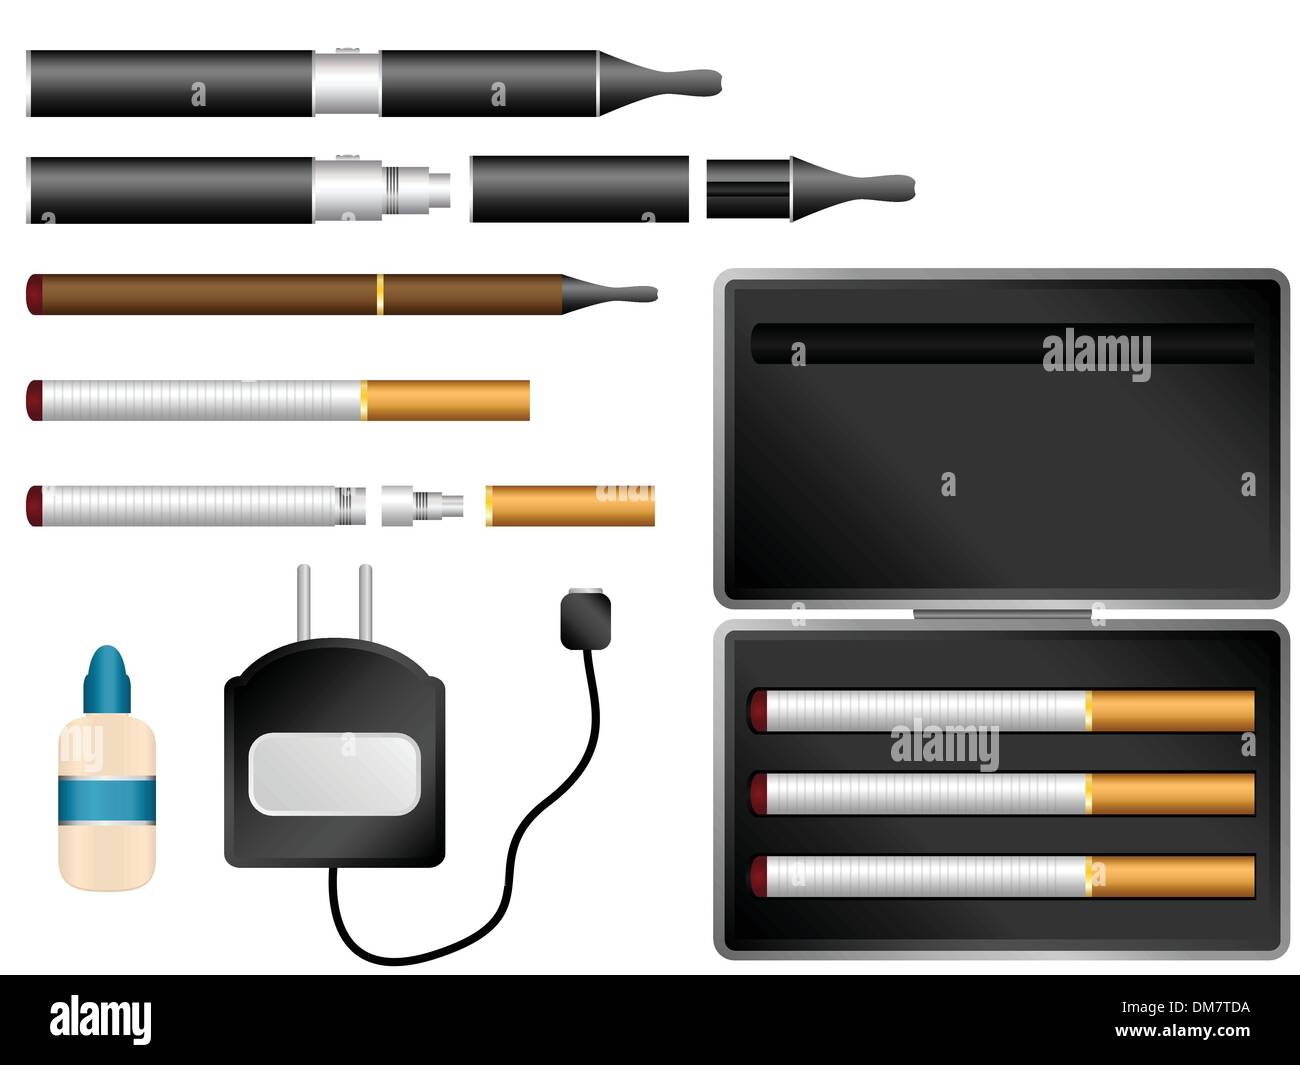 Electronic Cigarette Kit with Liquid, Charger and Case Stock Vector